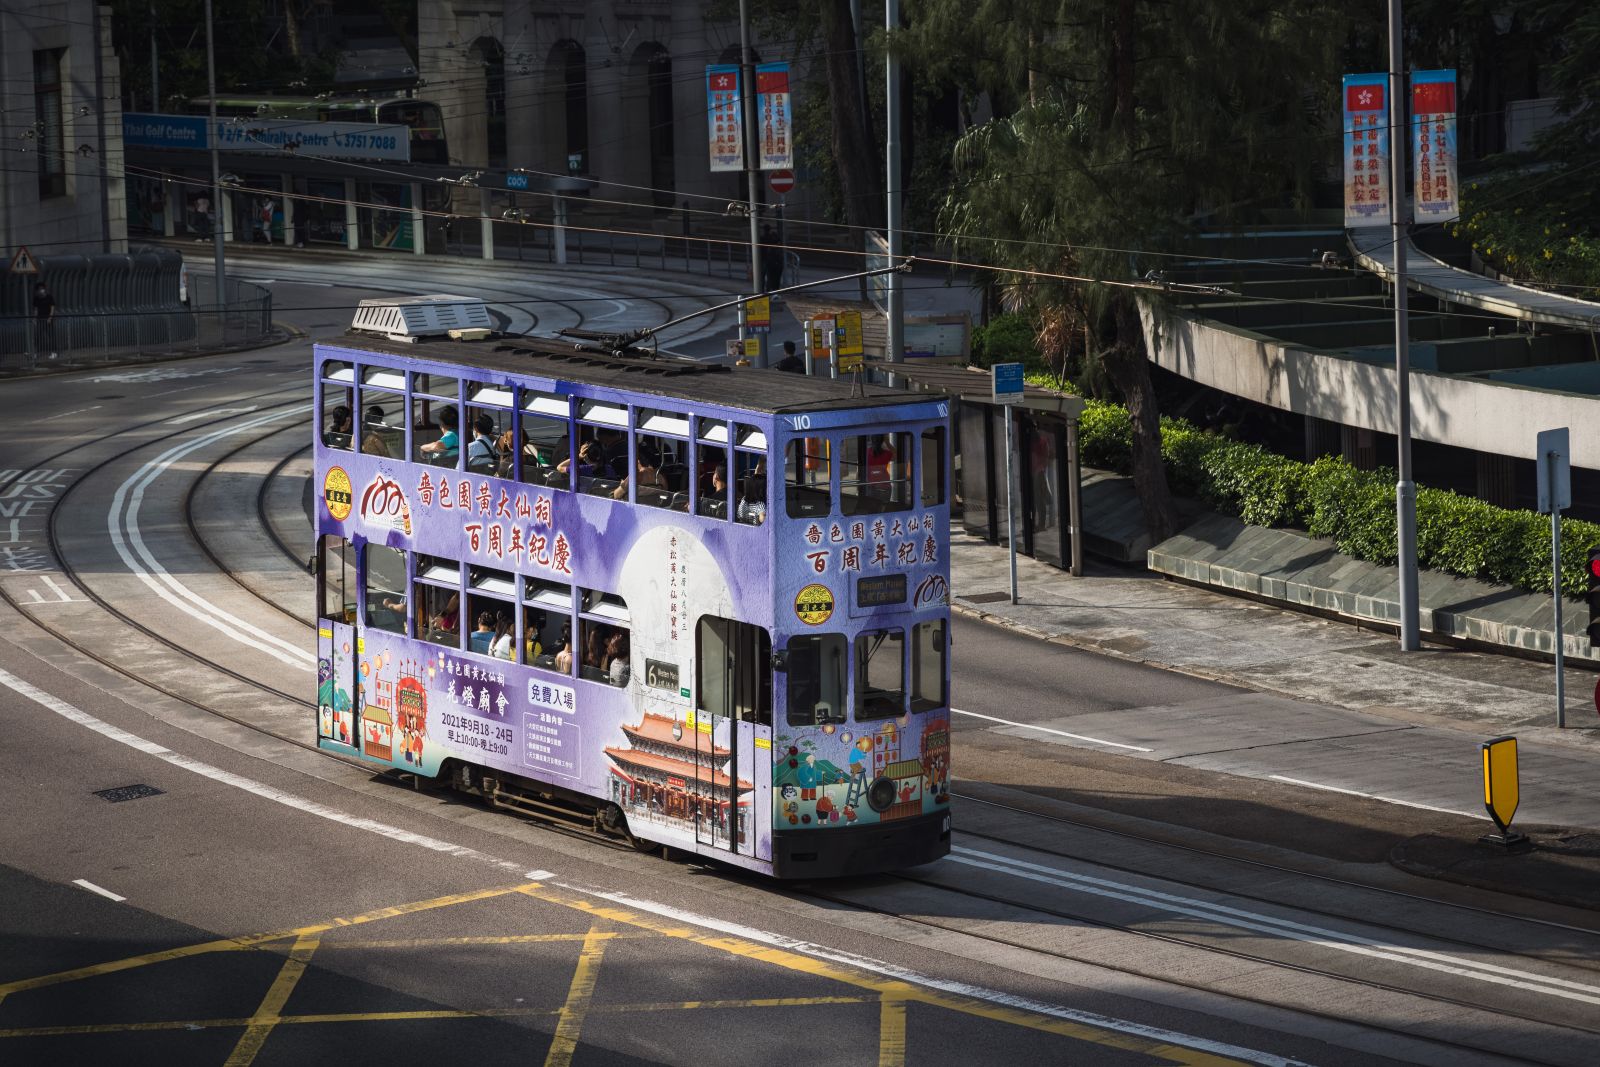 Take the east bound tram to North Point to get the best experience